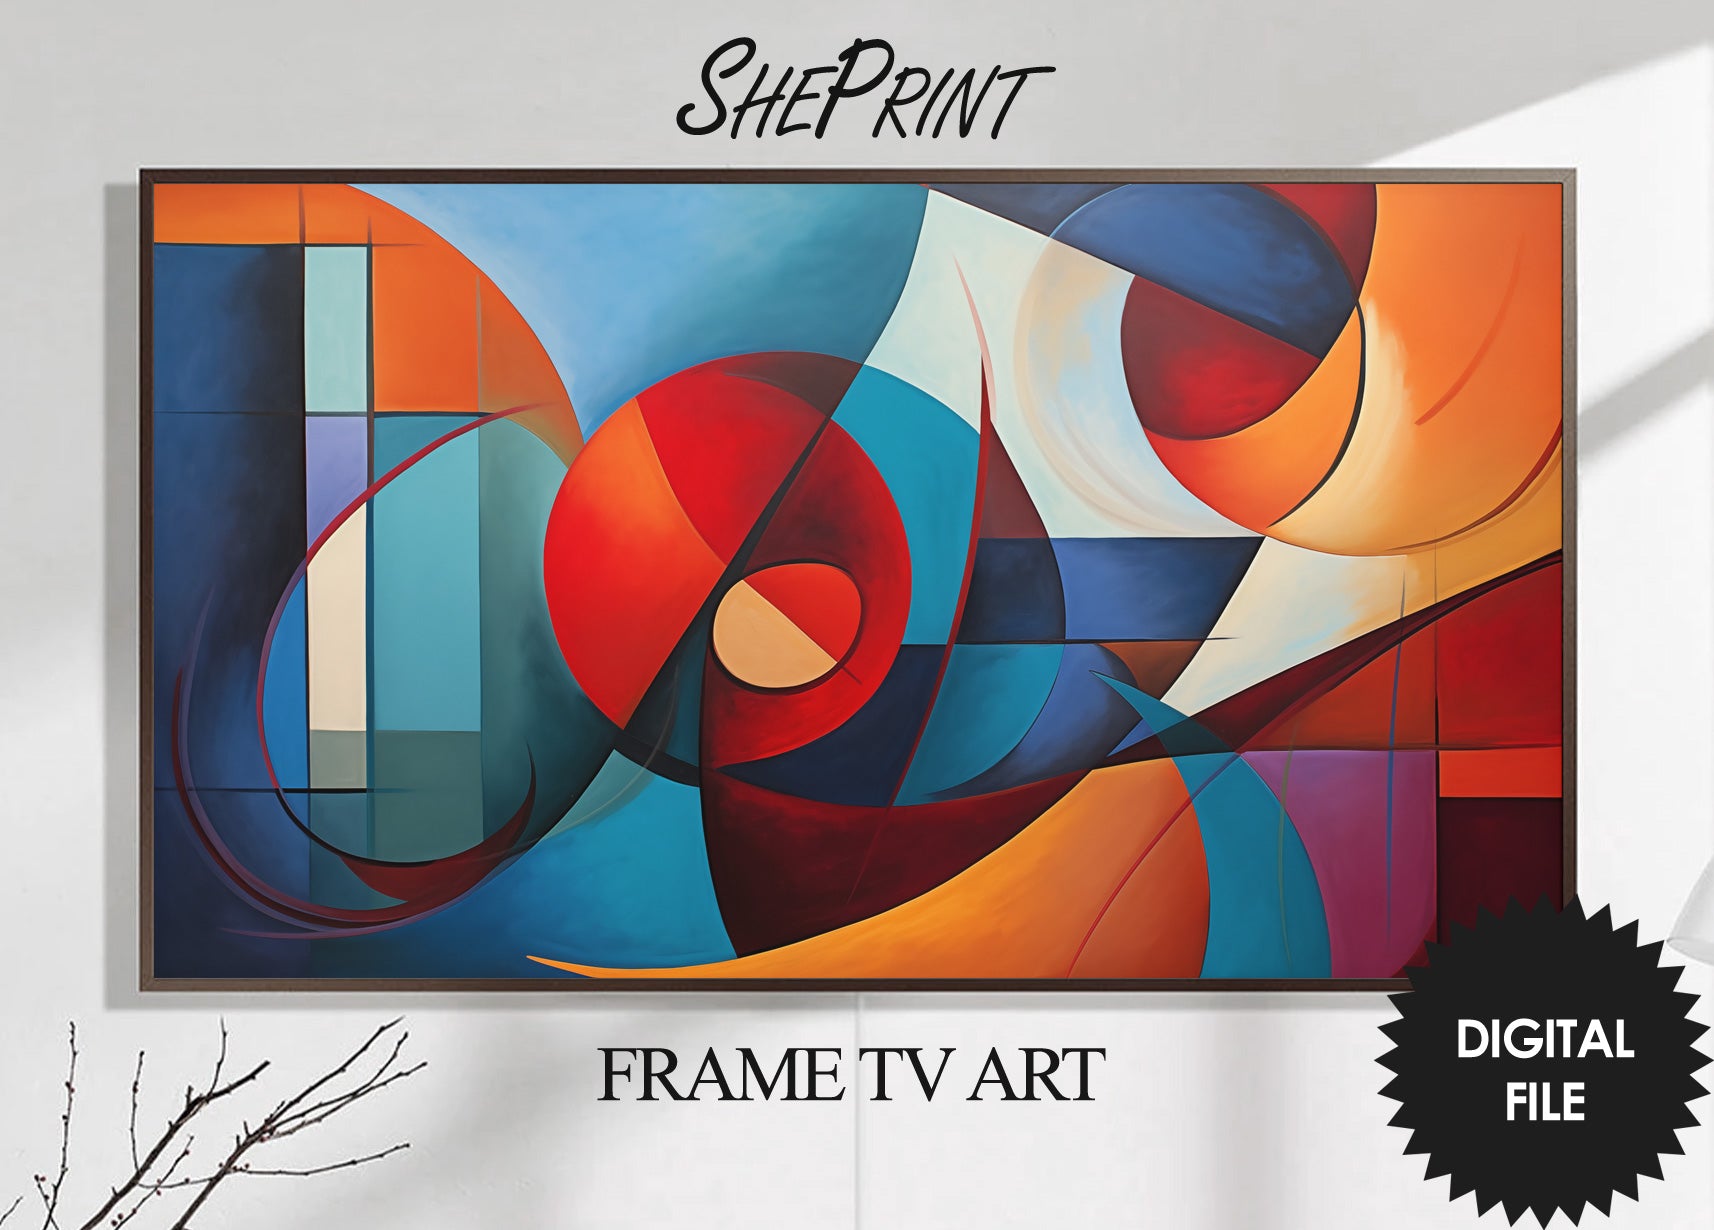 Vertical & Horizontal Frame TV Art, Curvy Shapes Abstract Art, preview on Samsung Frame TV, closer view